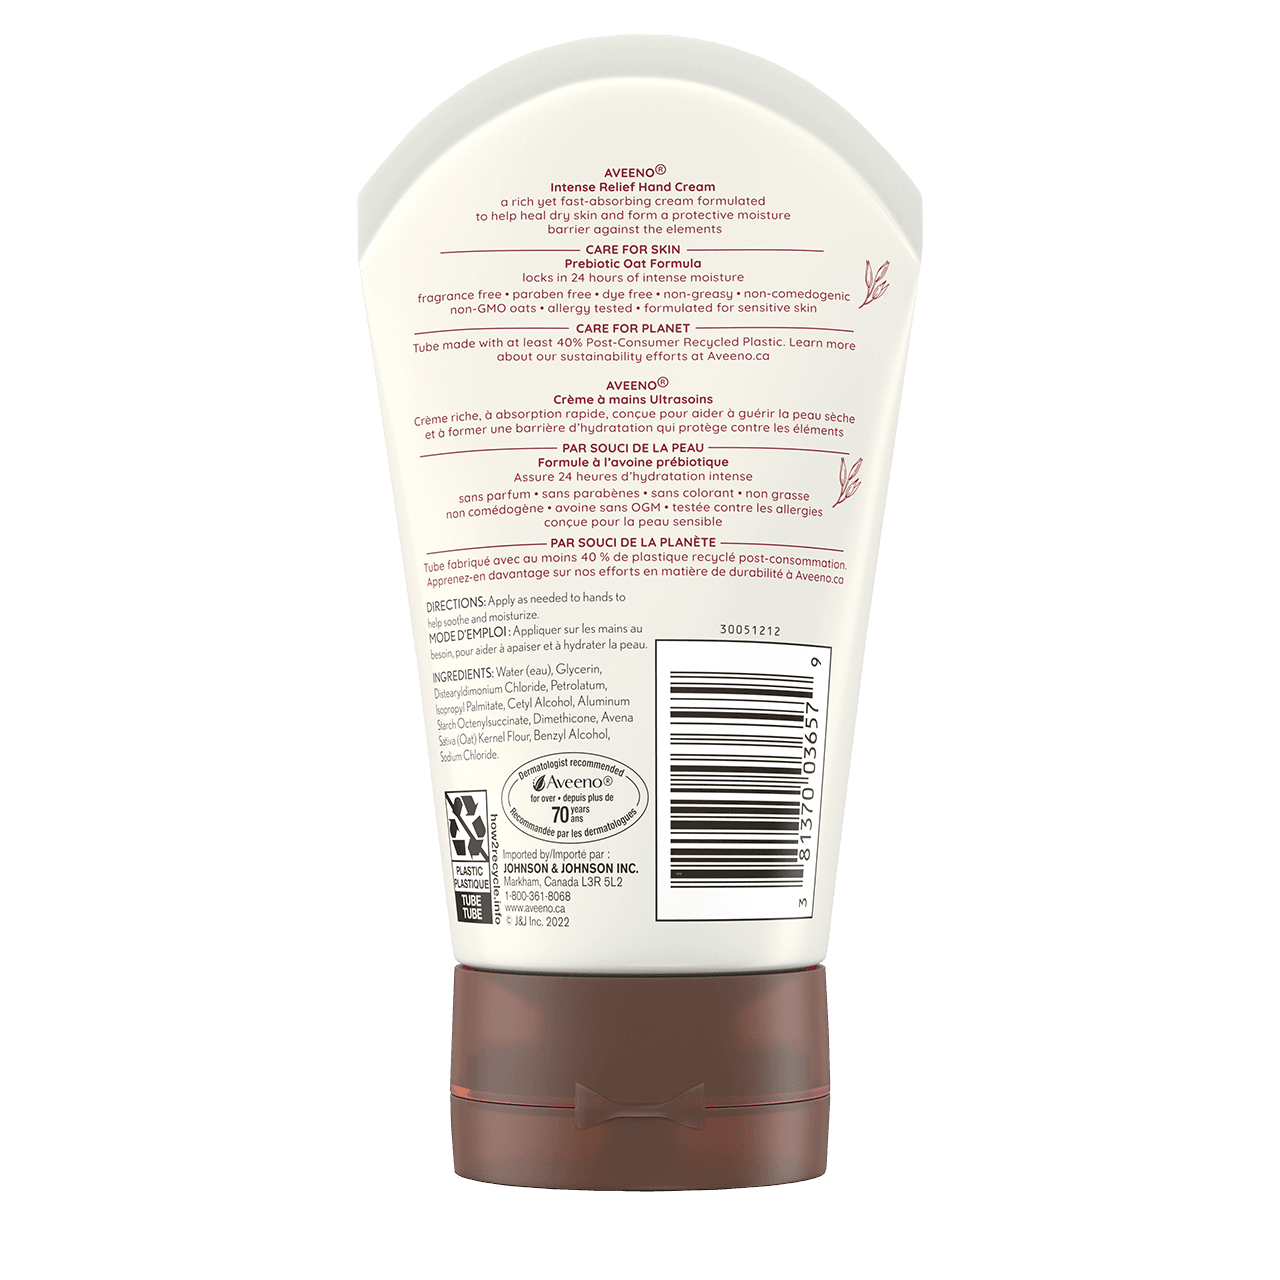 AVEENO® Intense Relief Hand Cream, Fragrance-free, 97ml squeeze bottle, back label